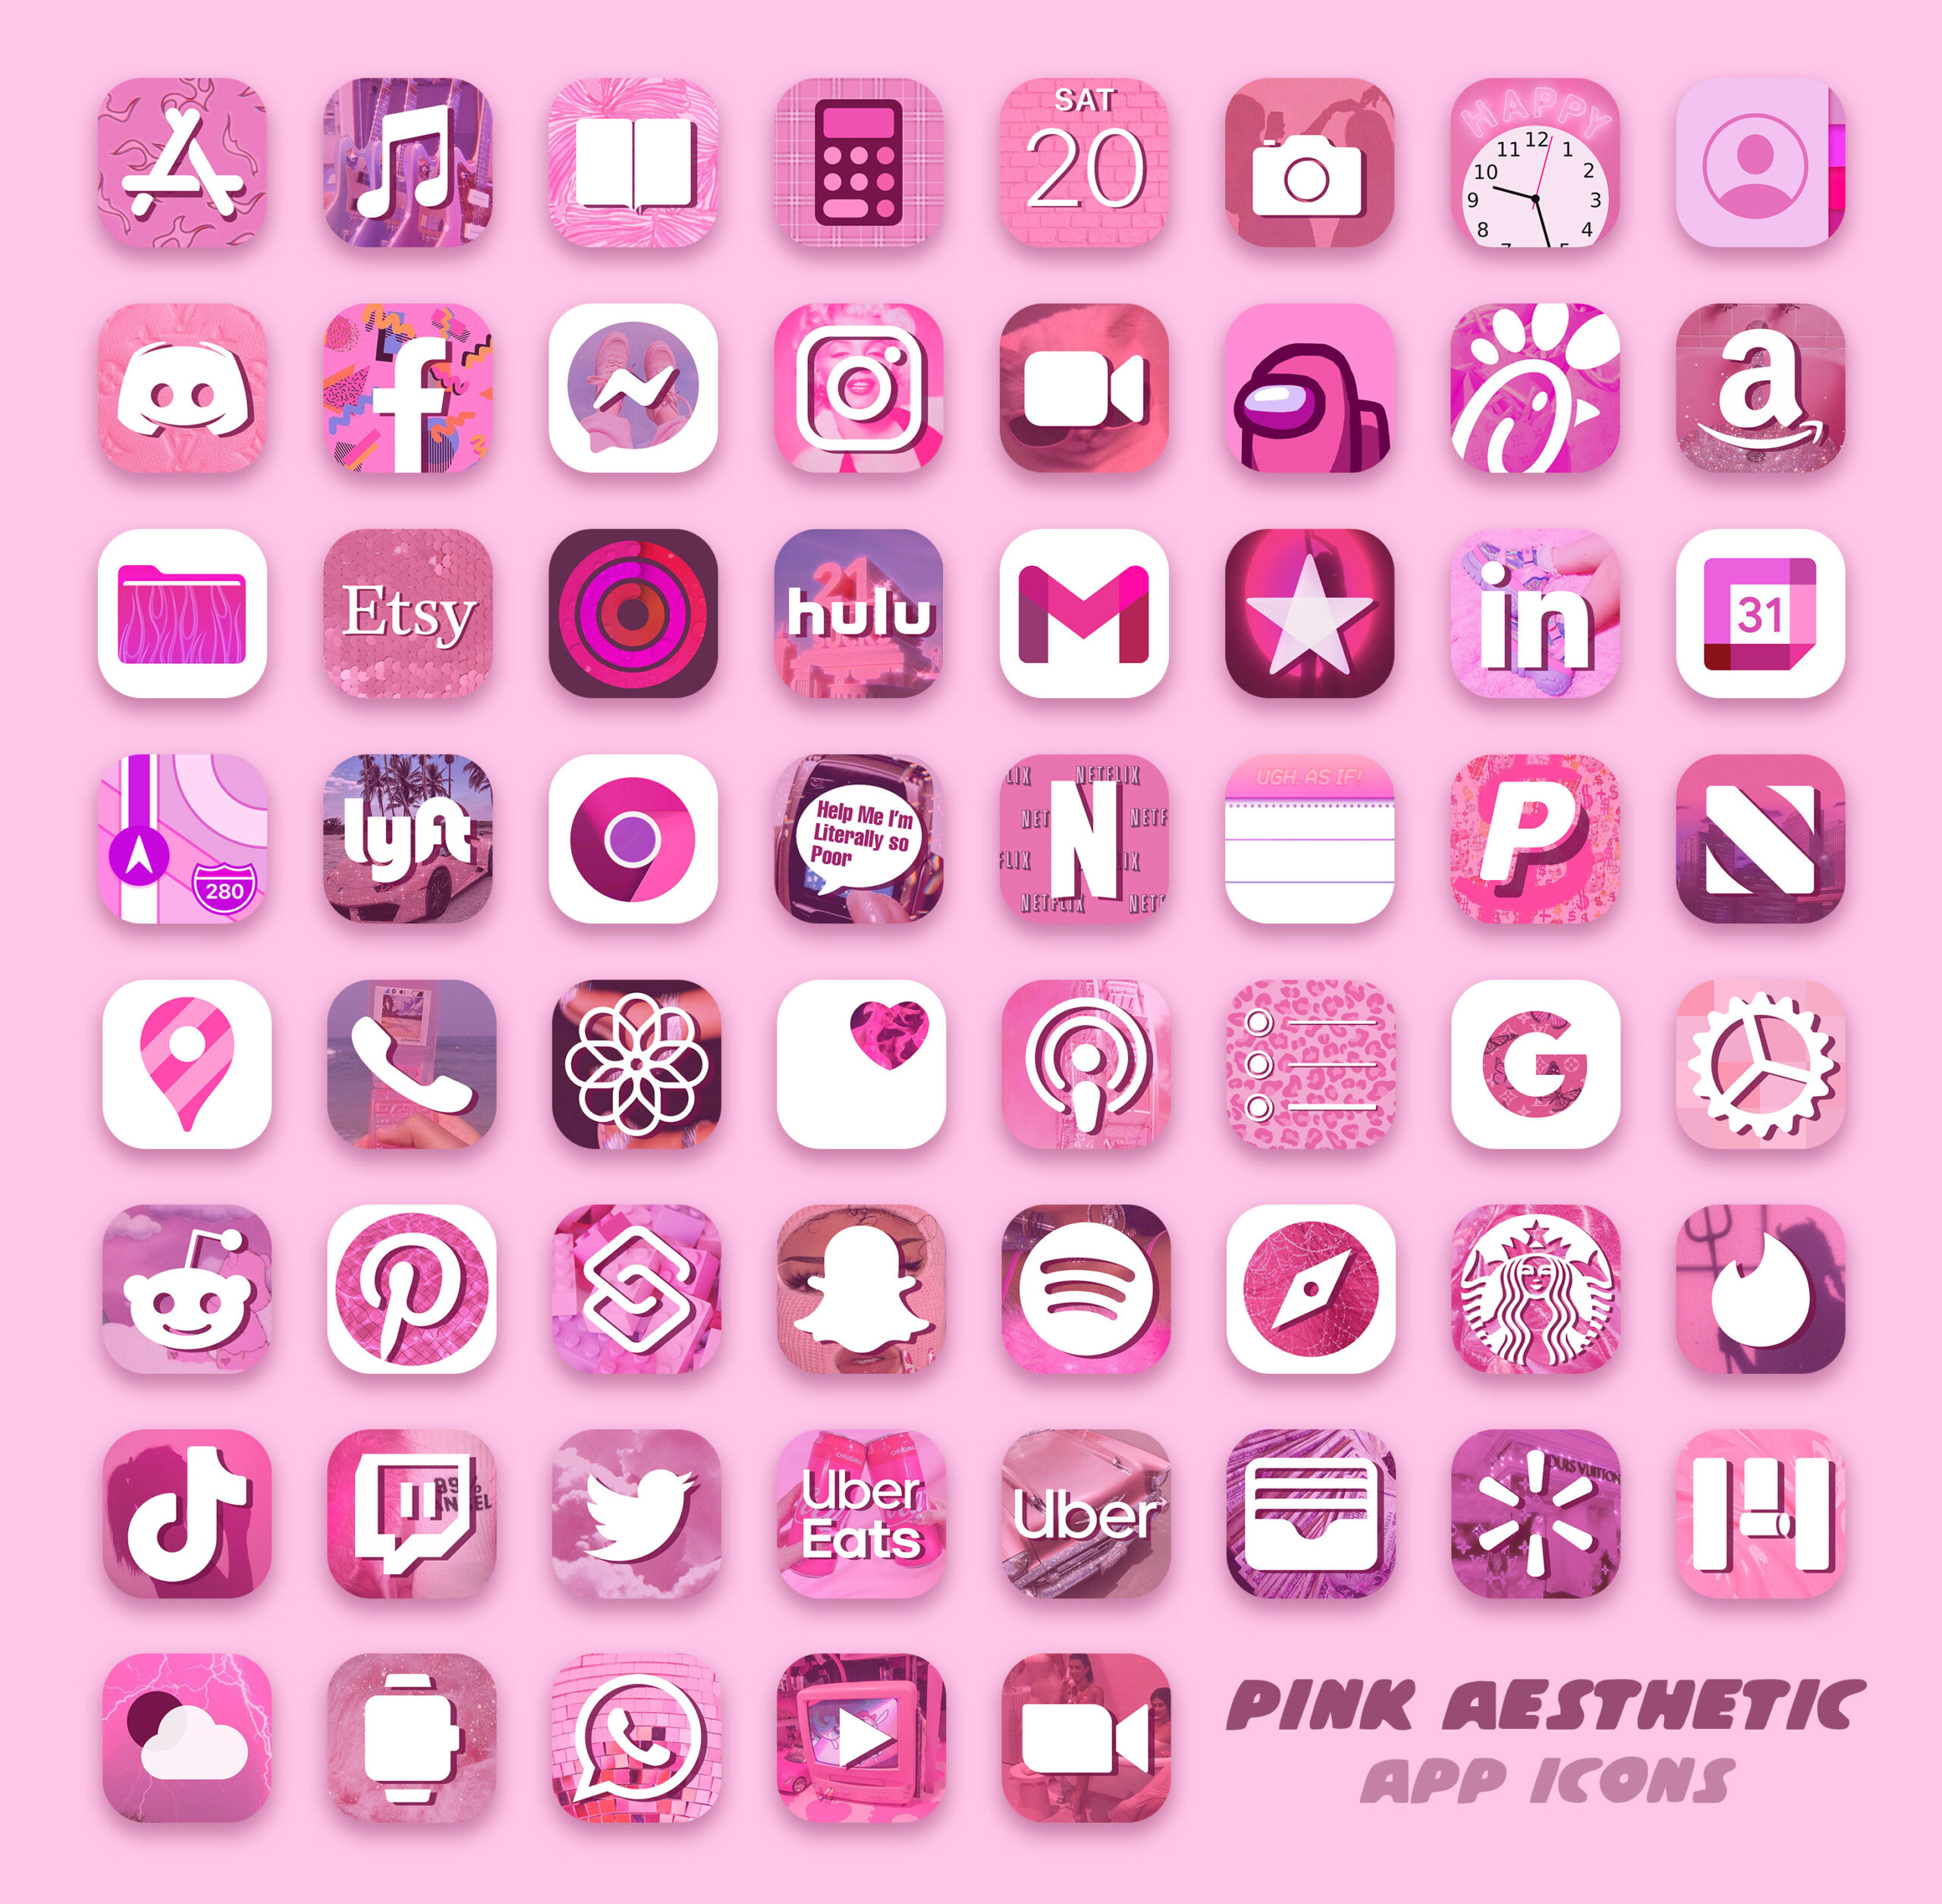 pink aesthetic app icons pack preview 3.